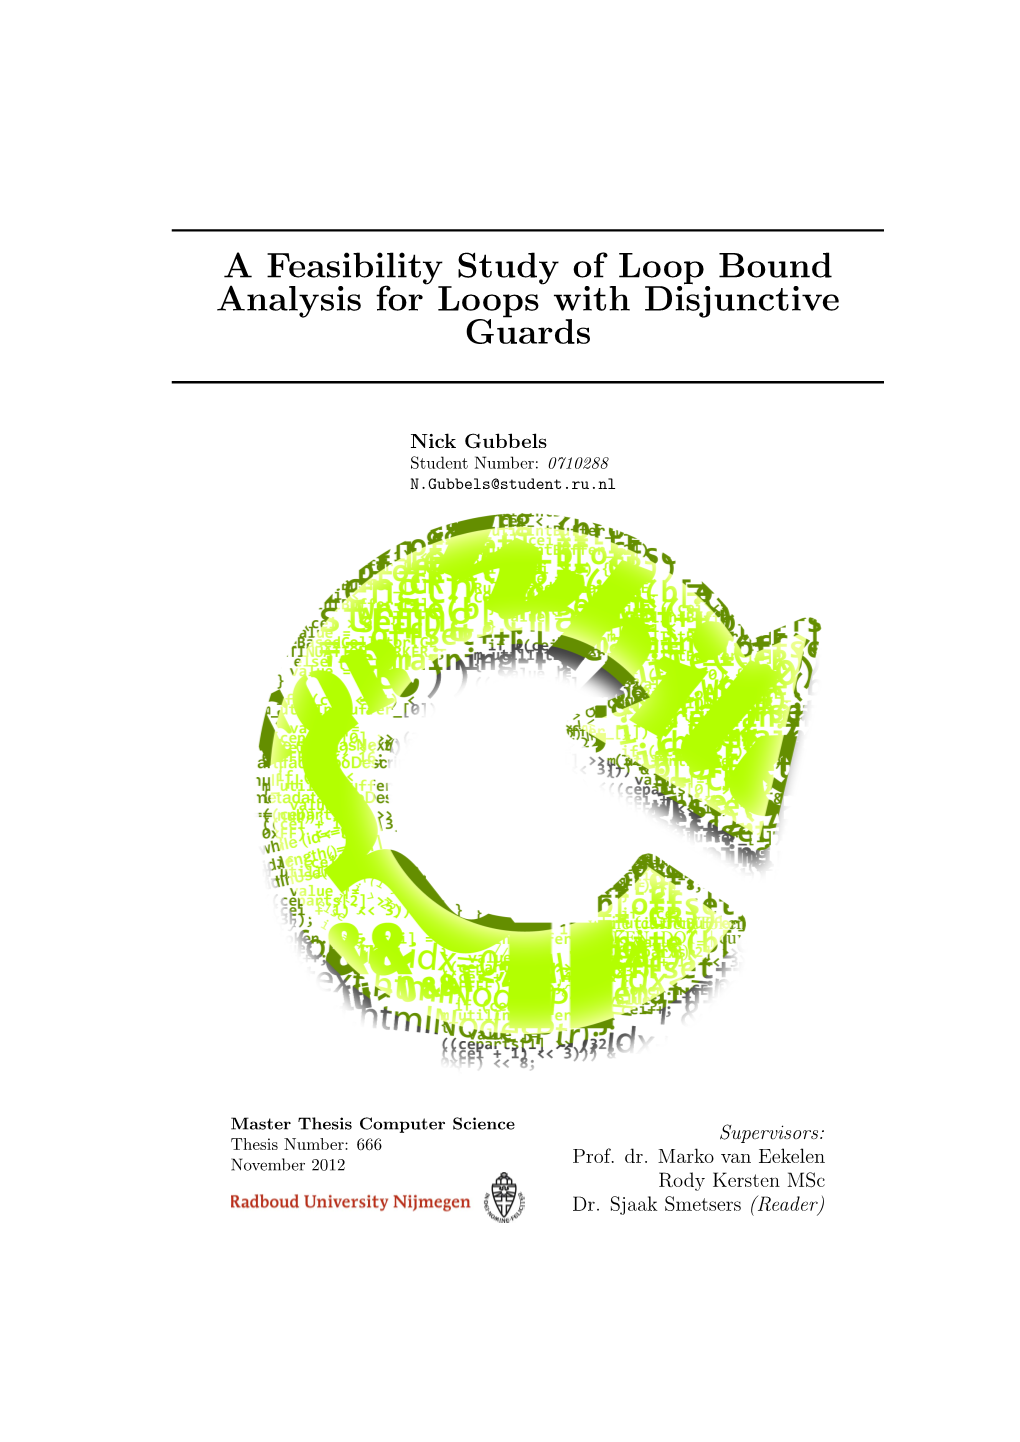 A Feasibility Study of Loop Bound Analysis for Loops with Disjunctive Guards